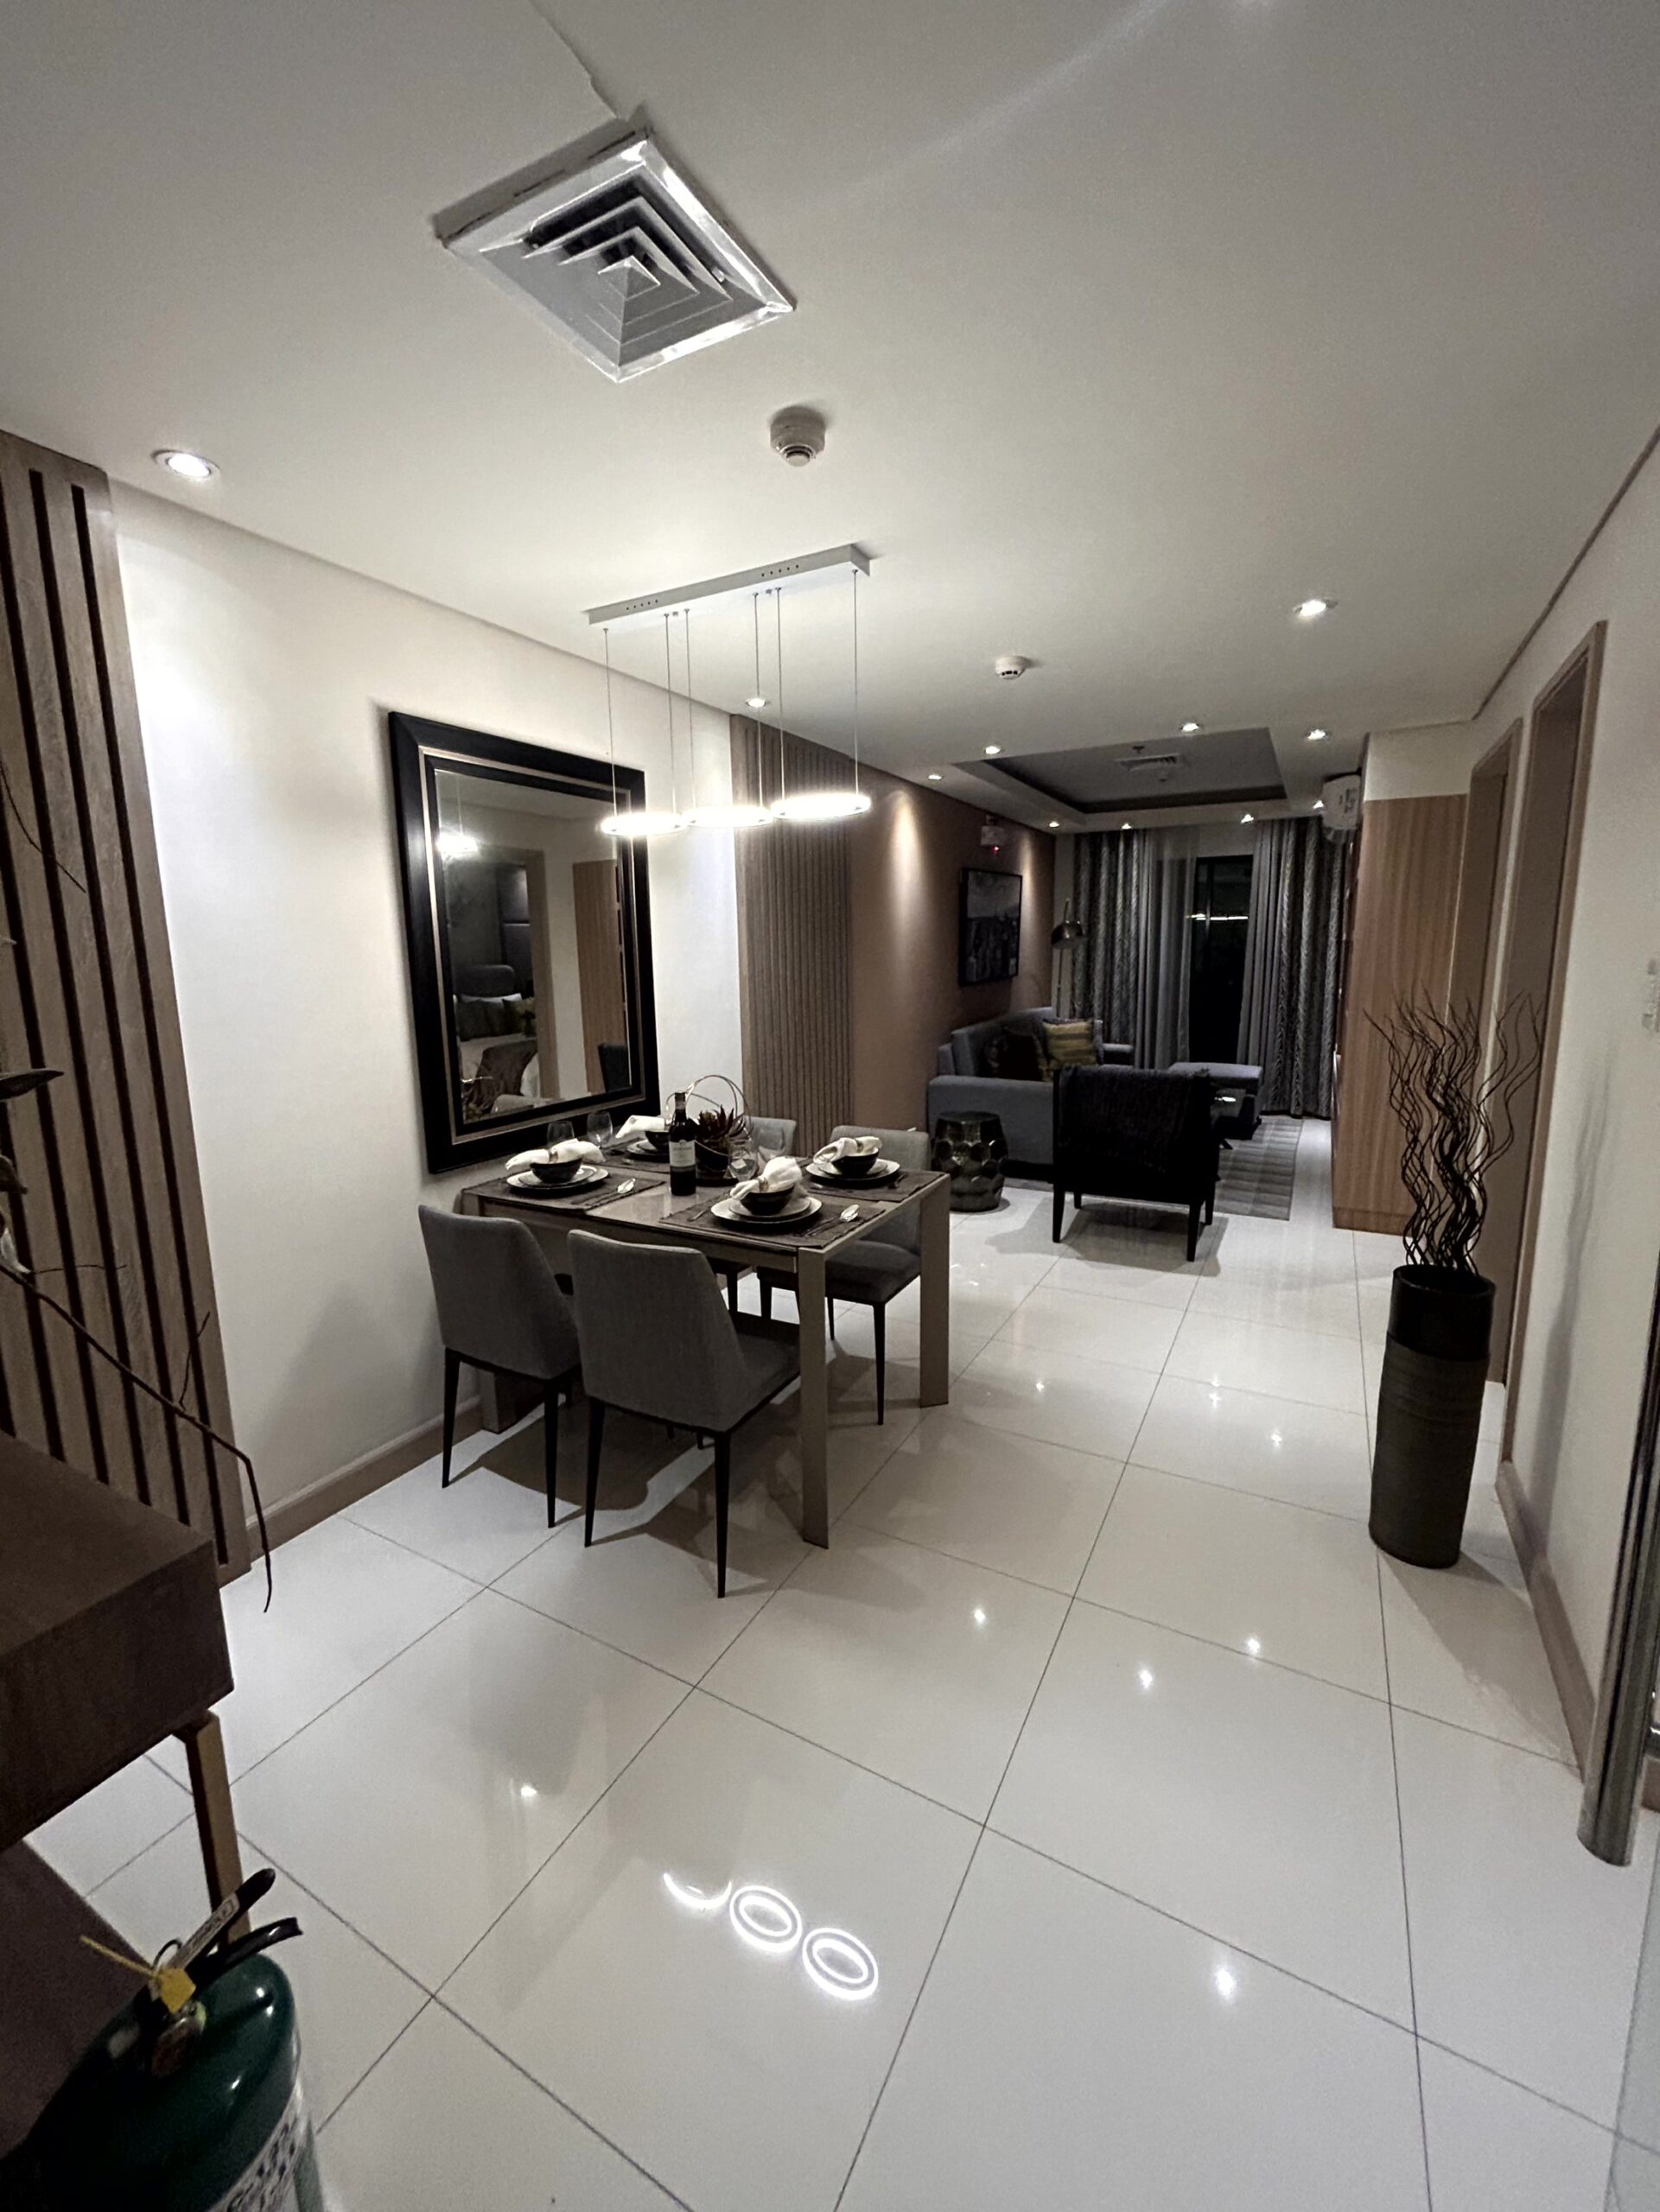 Luxury 1 BR with Parking at The Fifth, Meralco Avenue, Ortigas Center